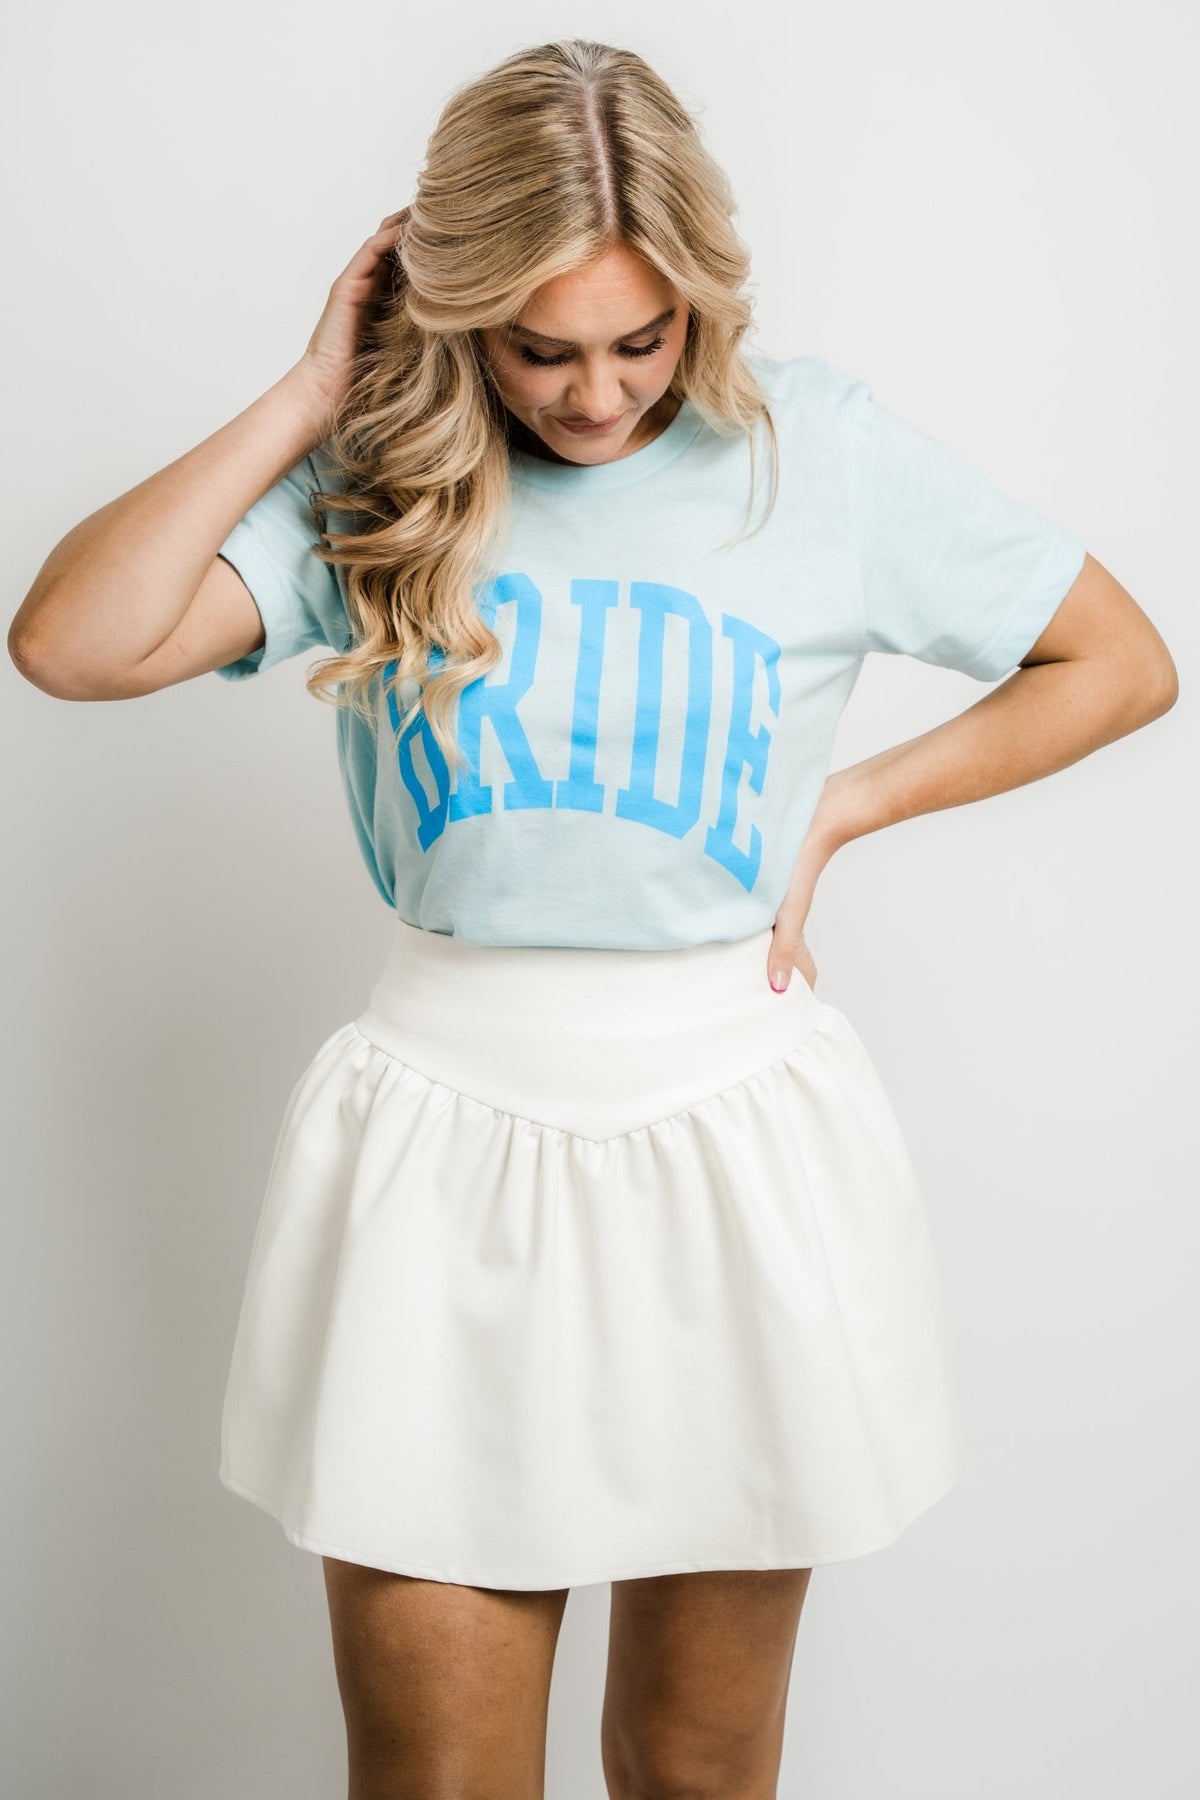 Bride XL short sleeve crew ice blue - Stylish T-shirts -  Cute Bridal Collection at Lush Fashion Lounge Boutique in Oklahoma City